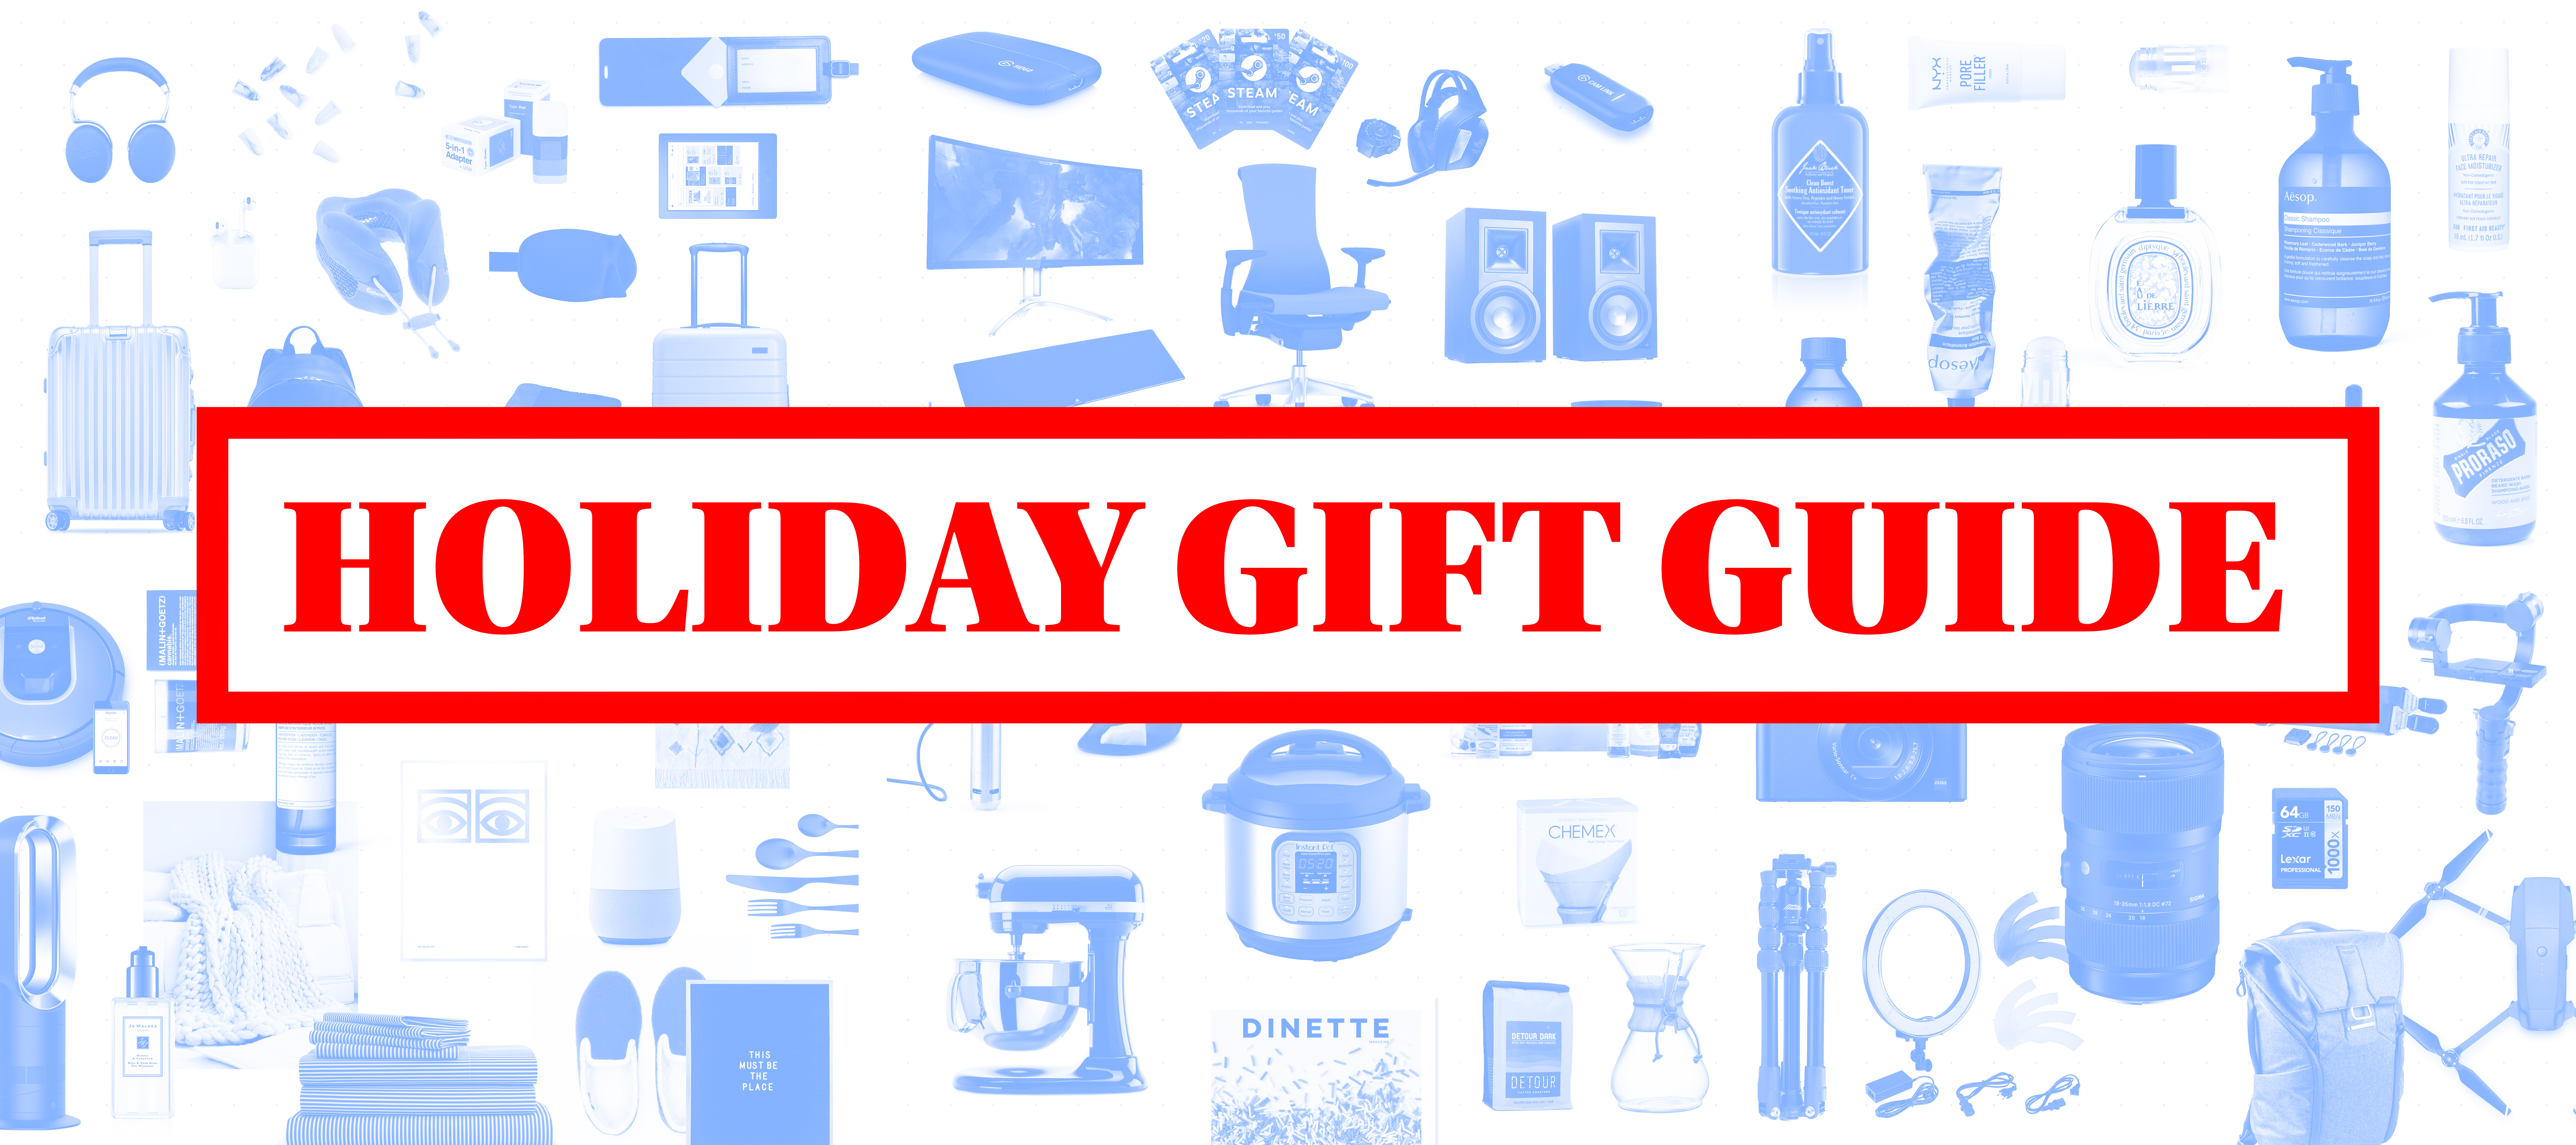 Jeff On The Road - HOLIDAY GIFT GUIDES 2017